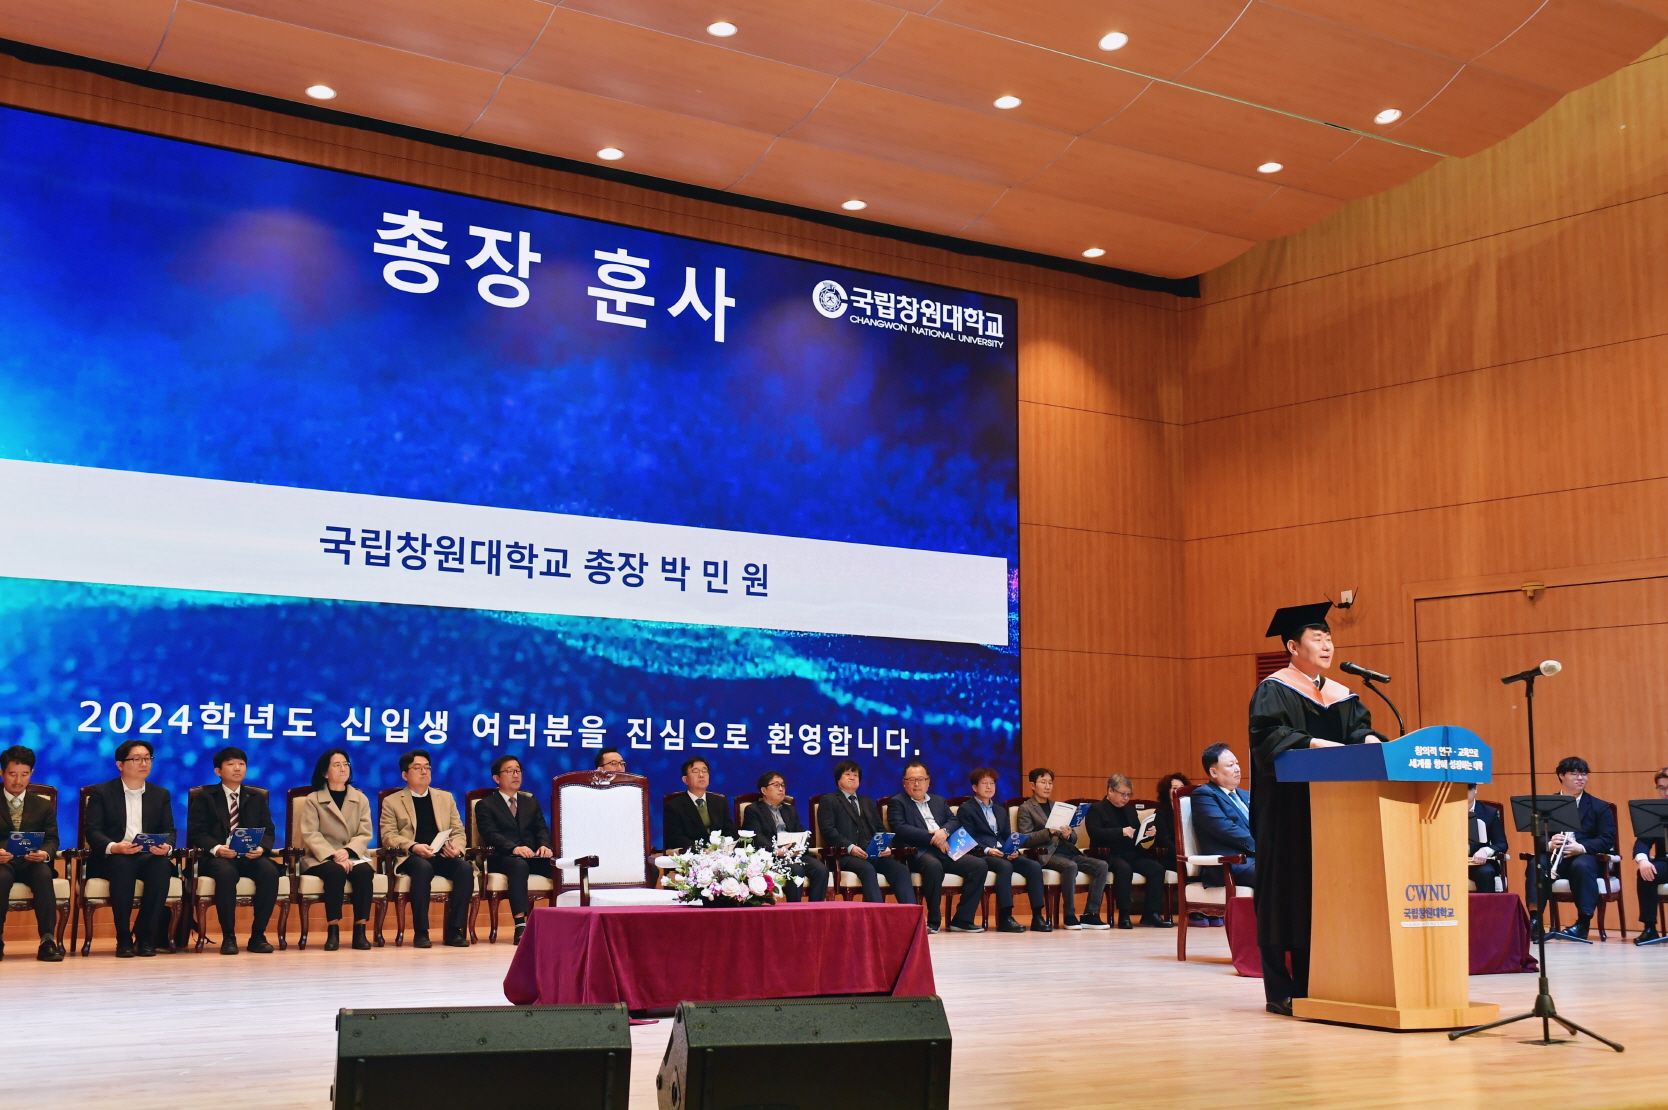 2024 Academic Year Entrance Ceremony, Welcoming 2,592 New Family Members